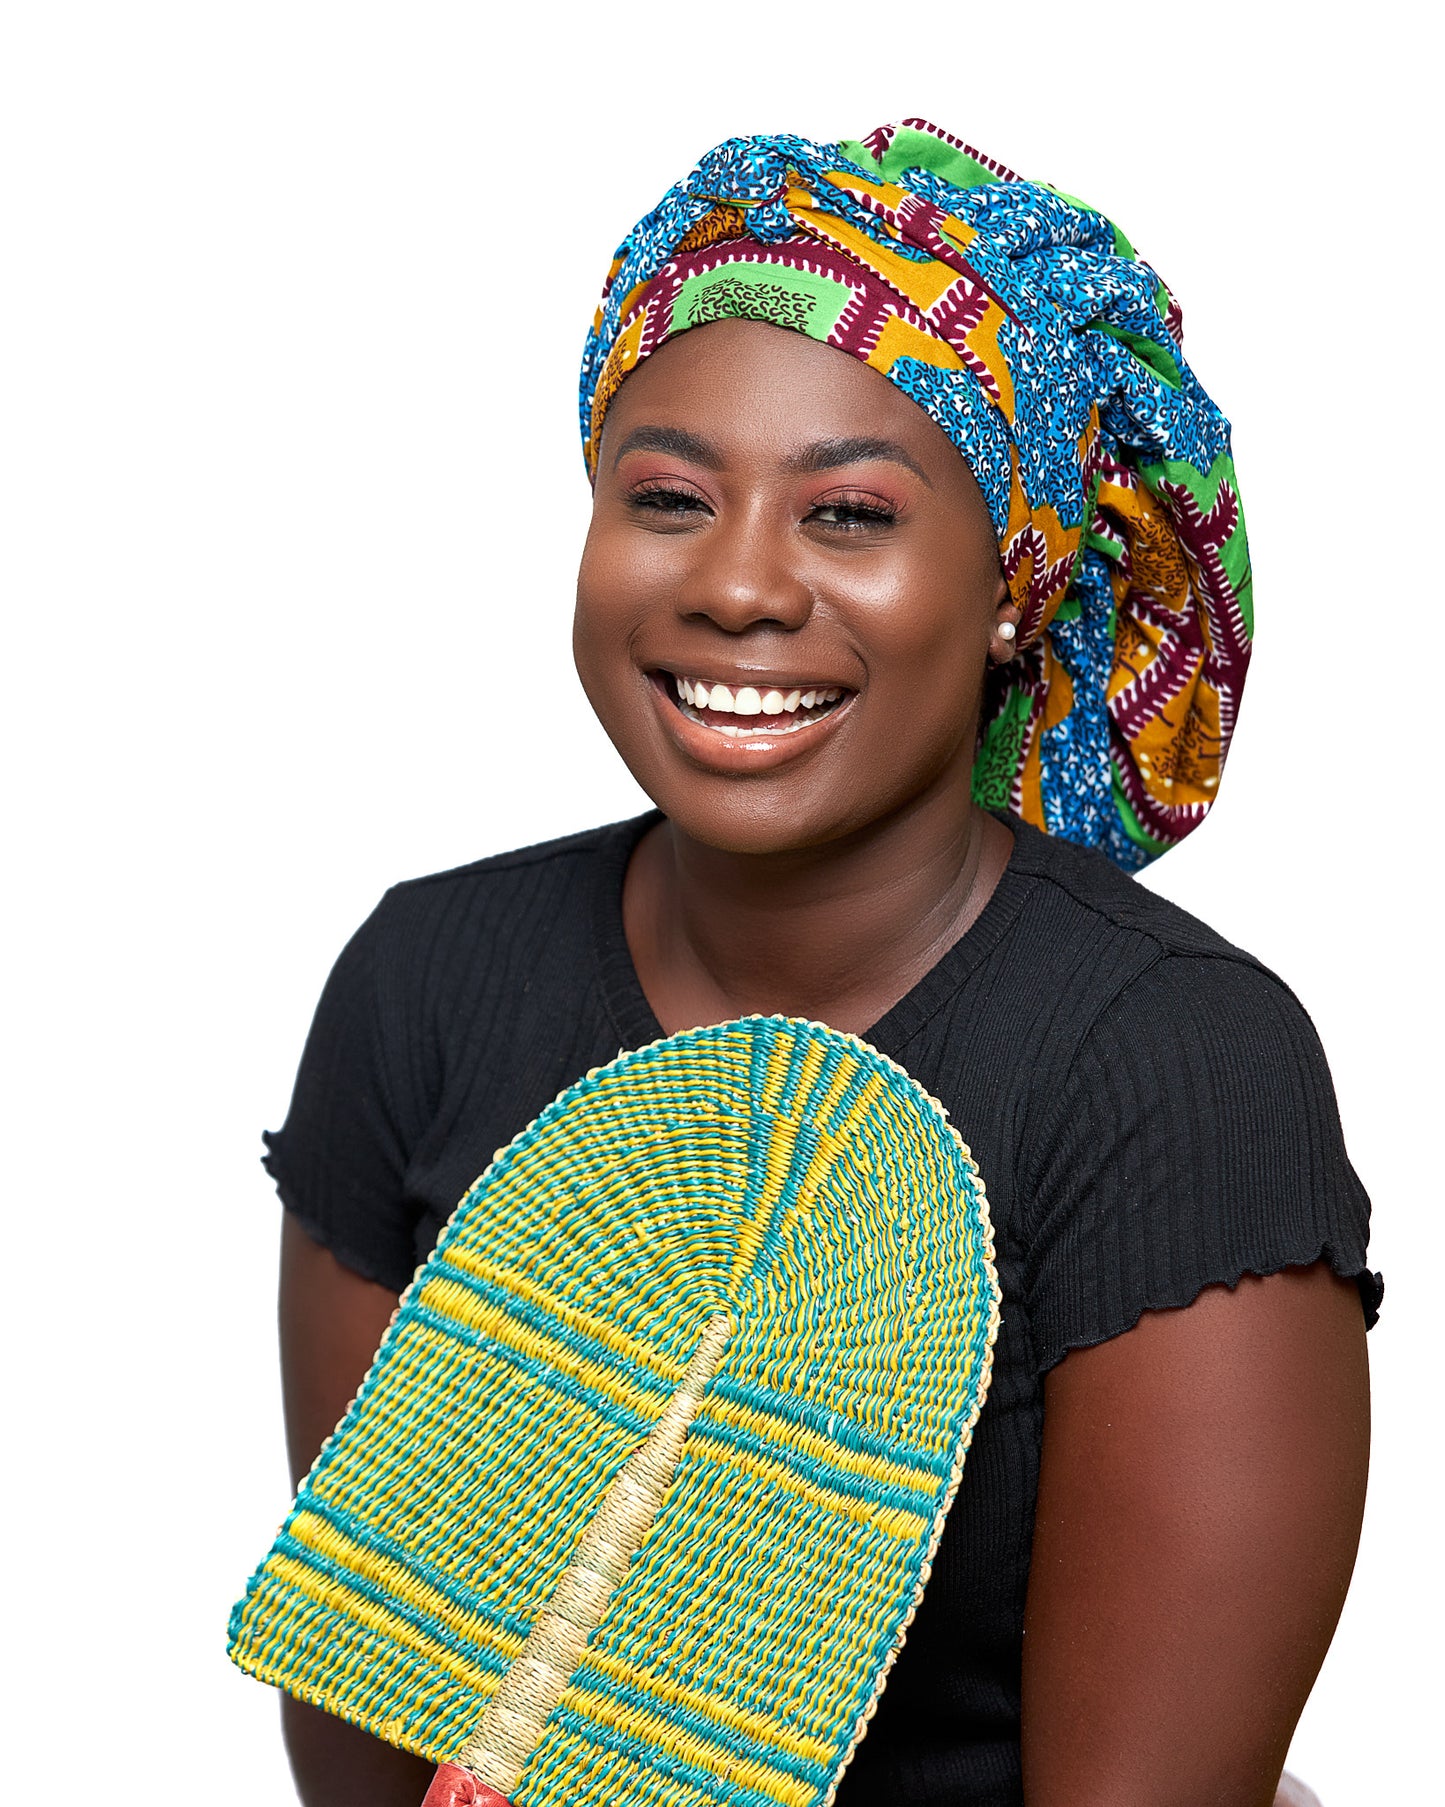 An Ankara Wax Print Made of Seablue, Green, Brown,yellow and White Blended Beautiful Colours And Pattern, Hand Made Elastic Silklined Bonnet With Band